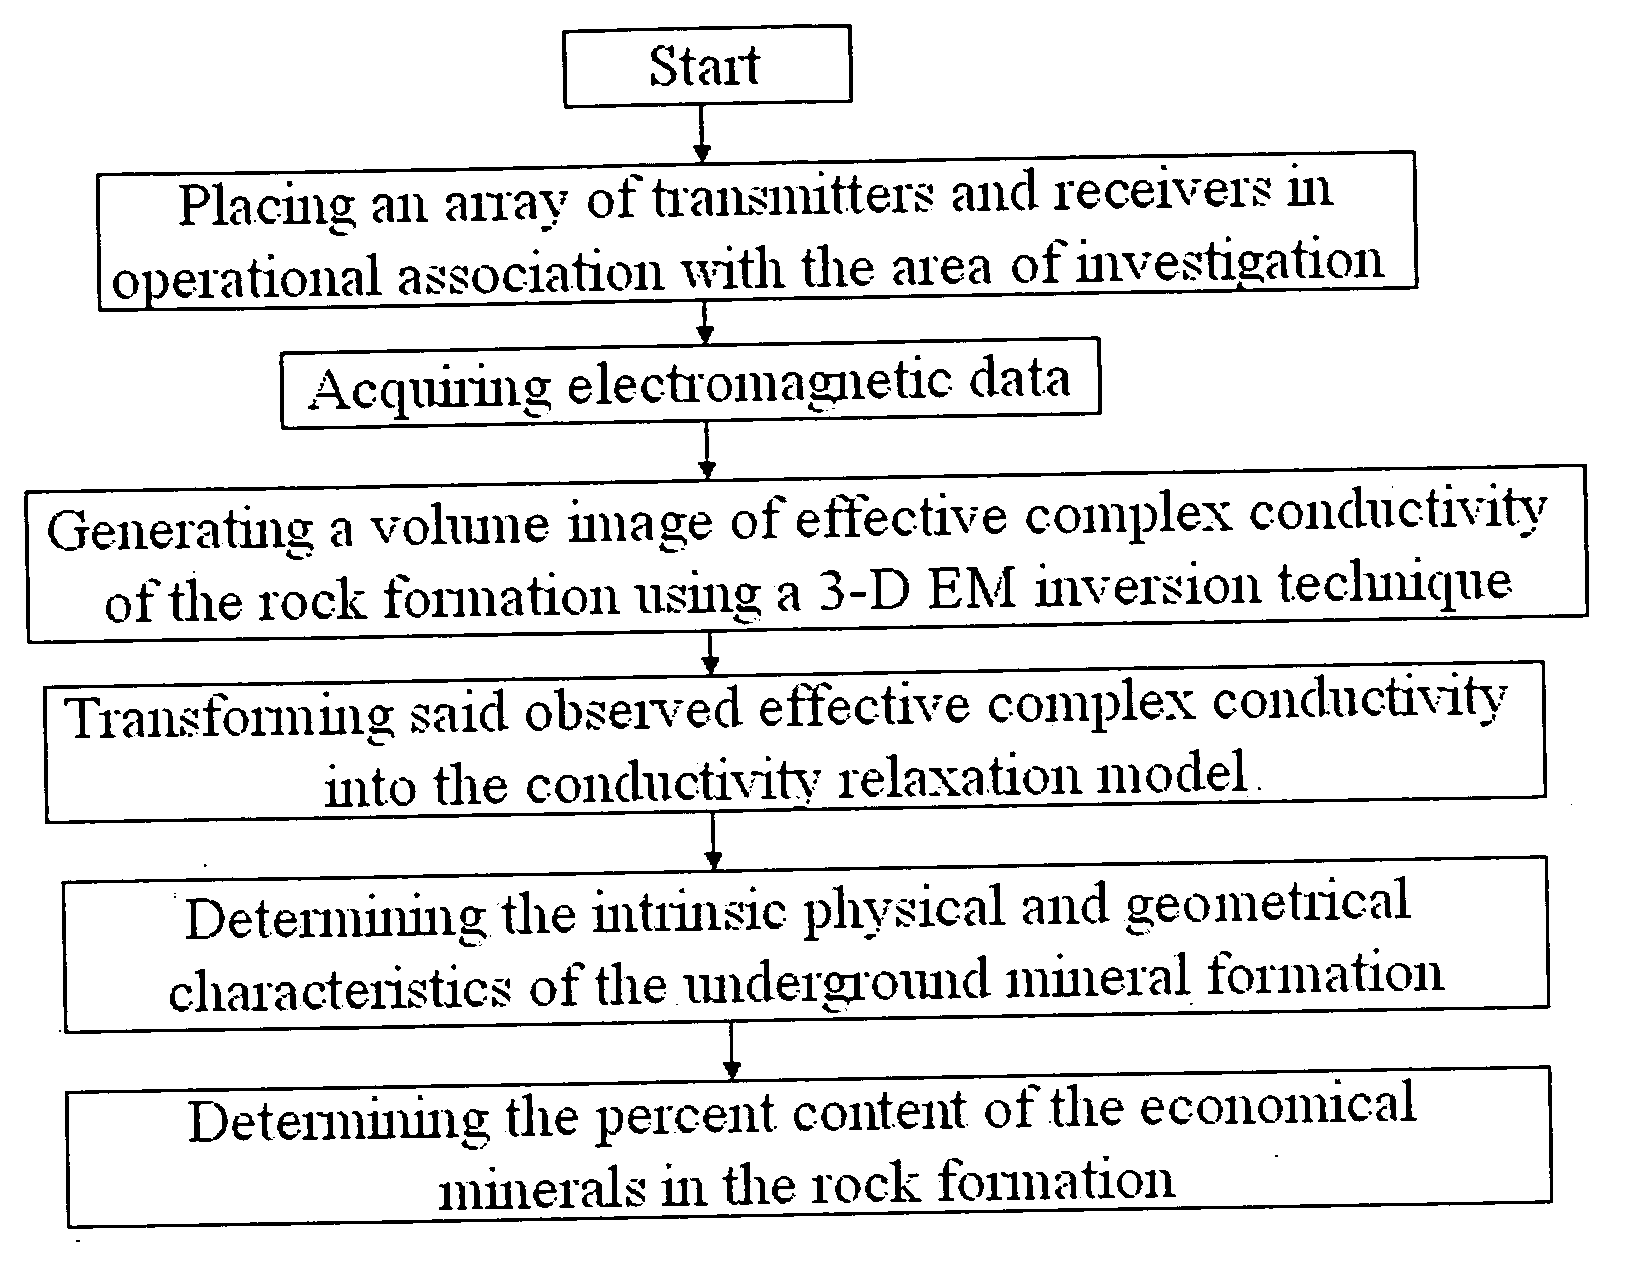 Geophysical technique for mineral exploration and discrimination based on electromagnetic methods and associated systems